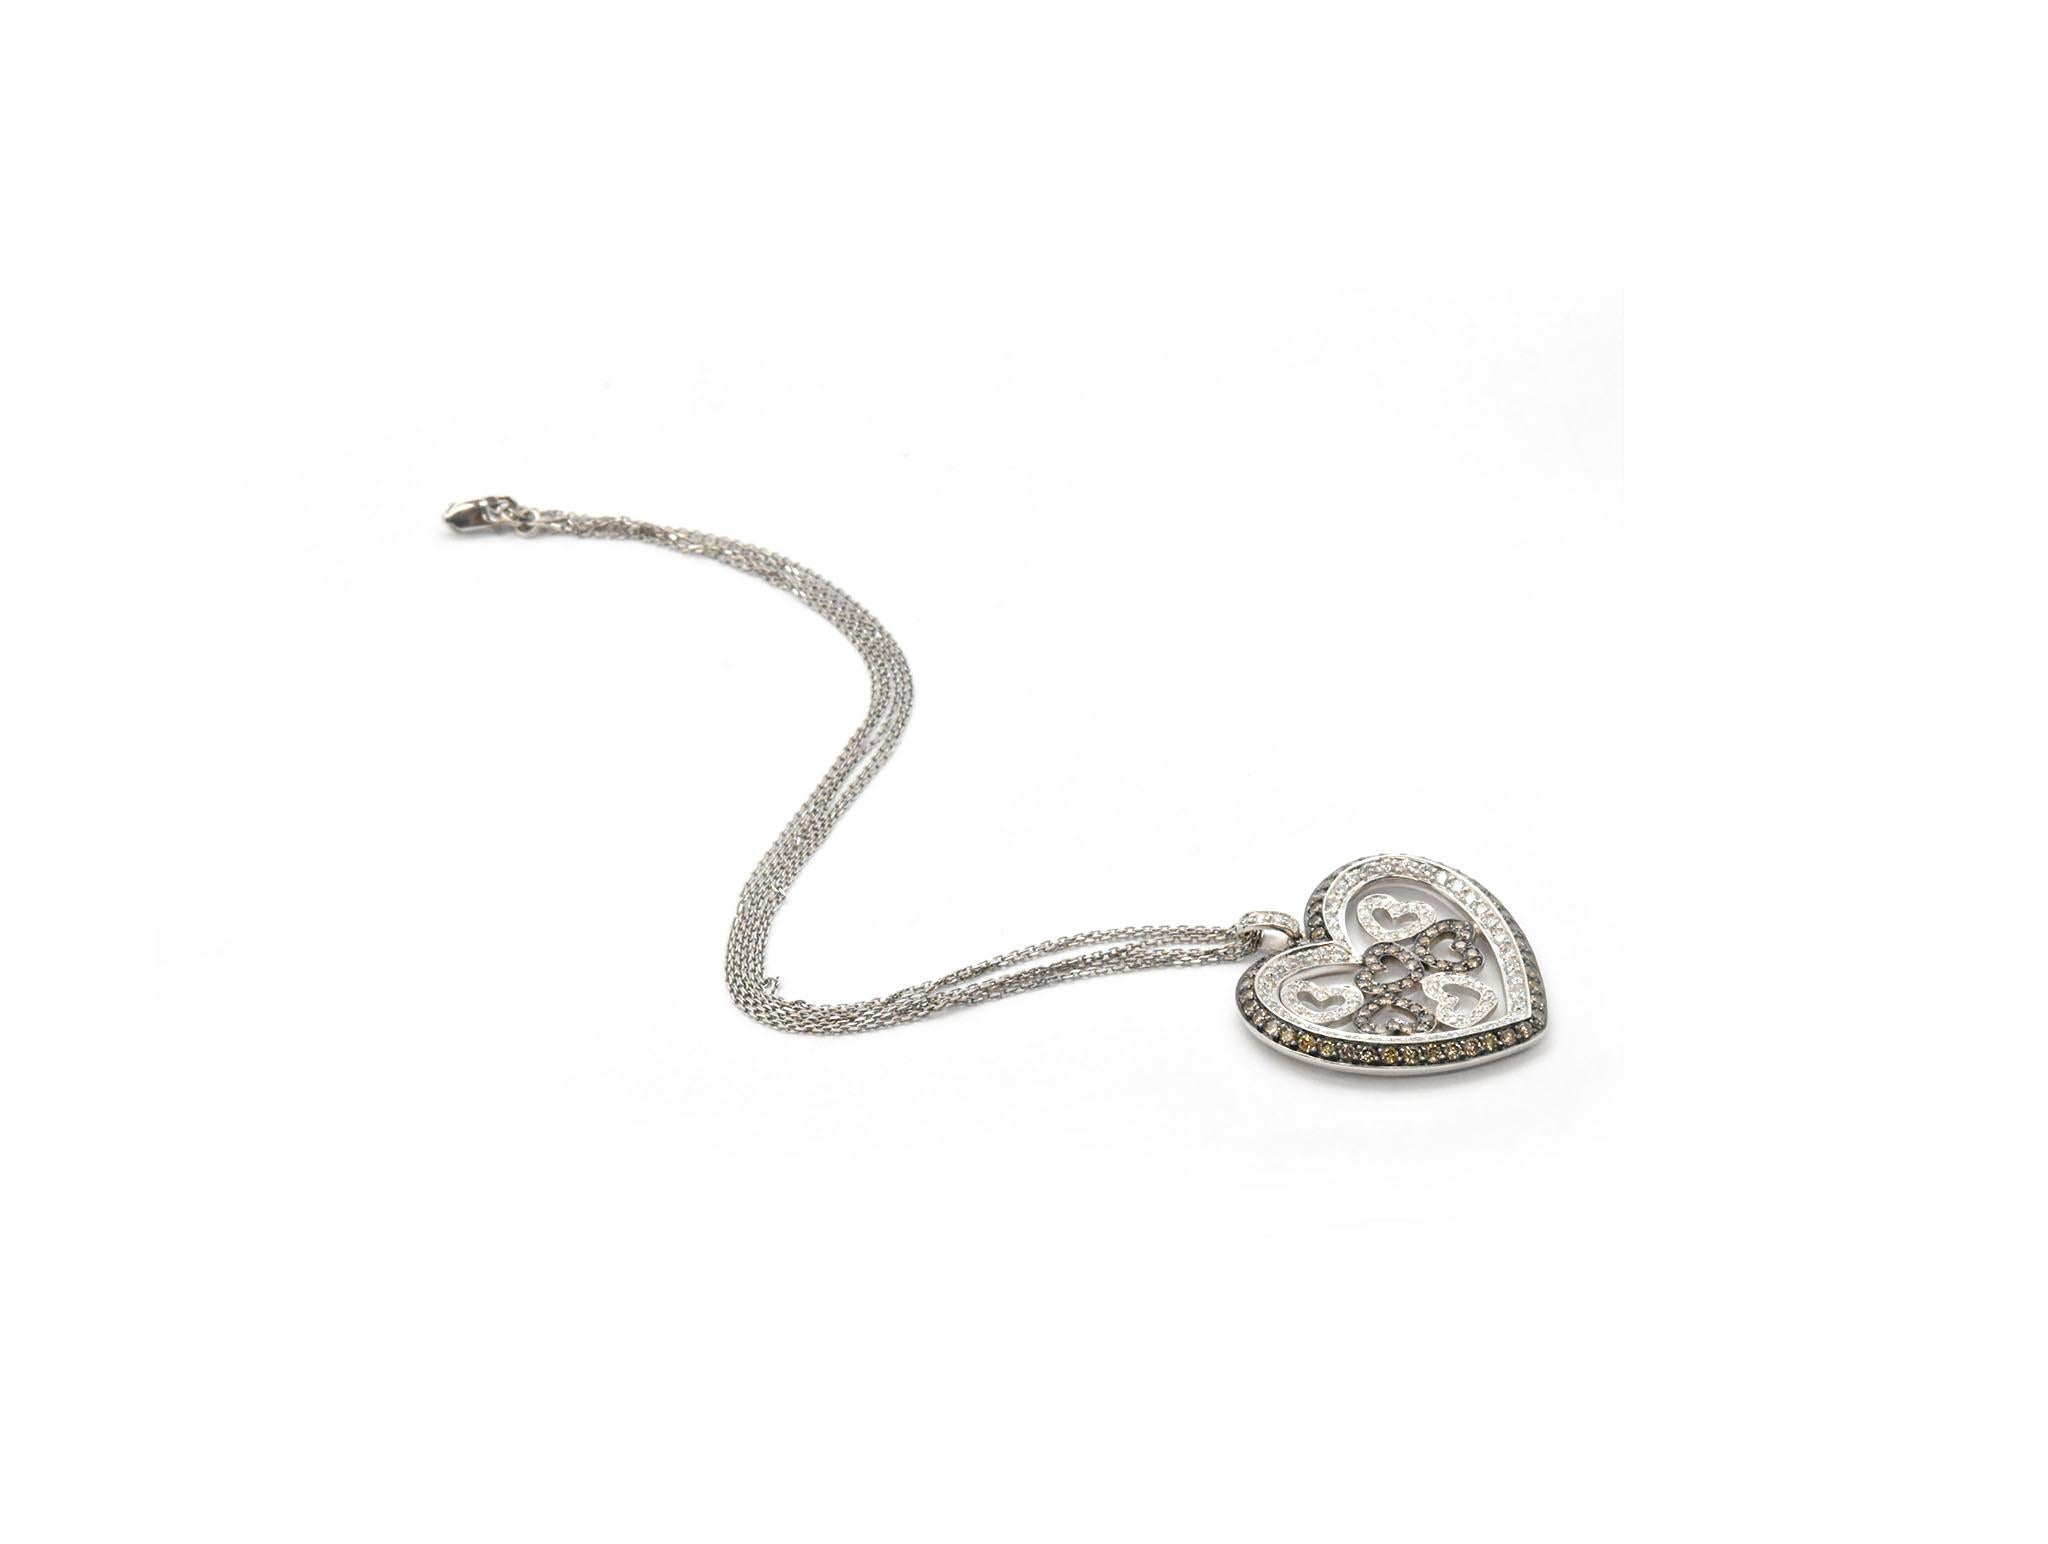 This fabulous necklace is made in solid 14k white gold. The heart pendant is set with both white and champagne diamonds for a total weight of 2.92 carats. The pendant measures 36x36mm, and it slides along a triple layer 14k white gold chain